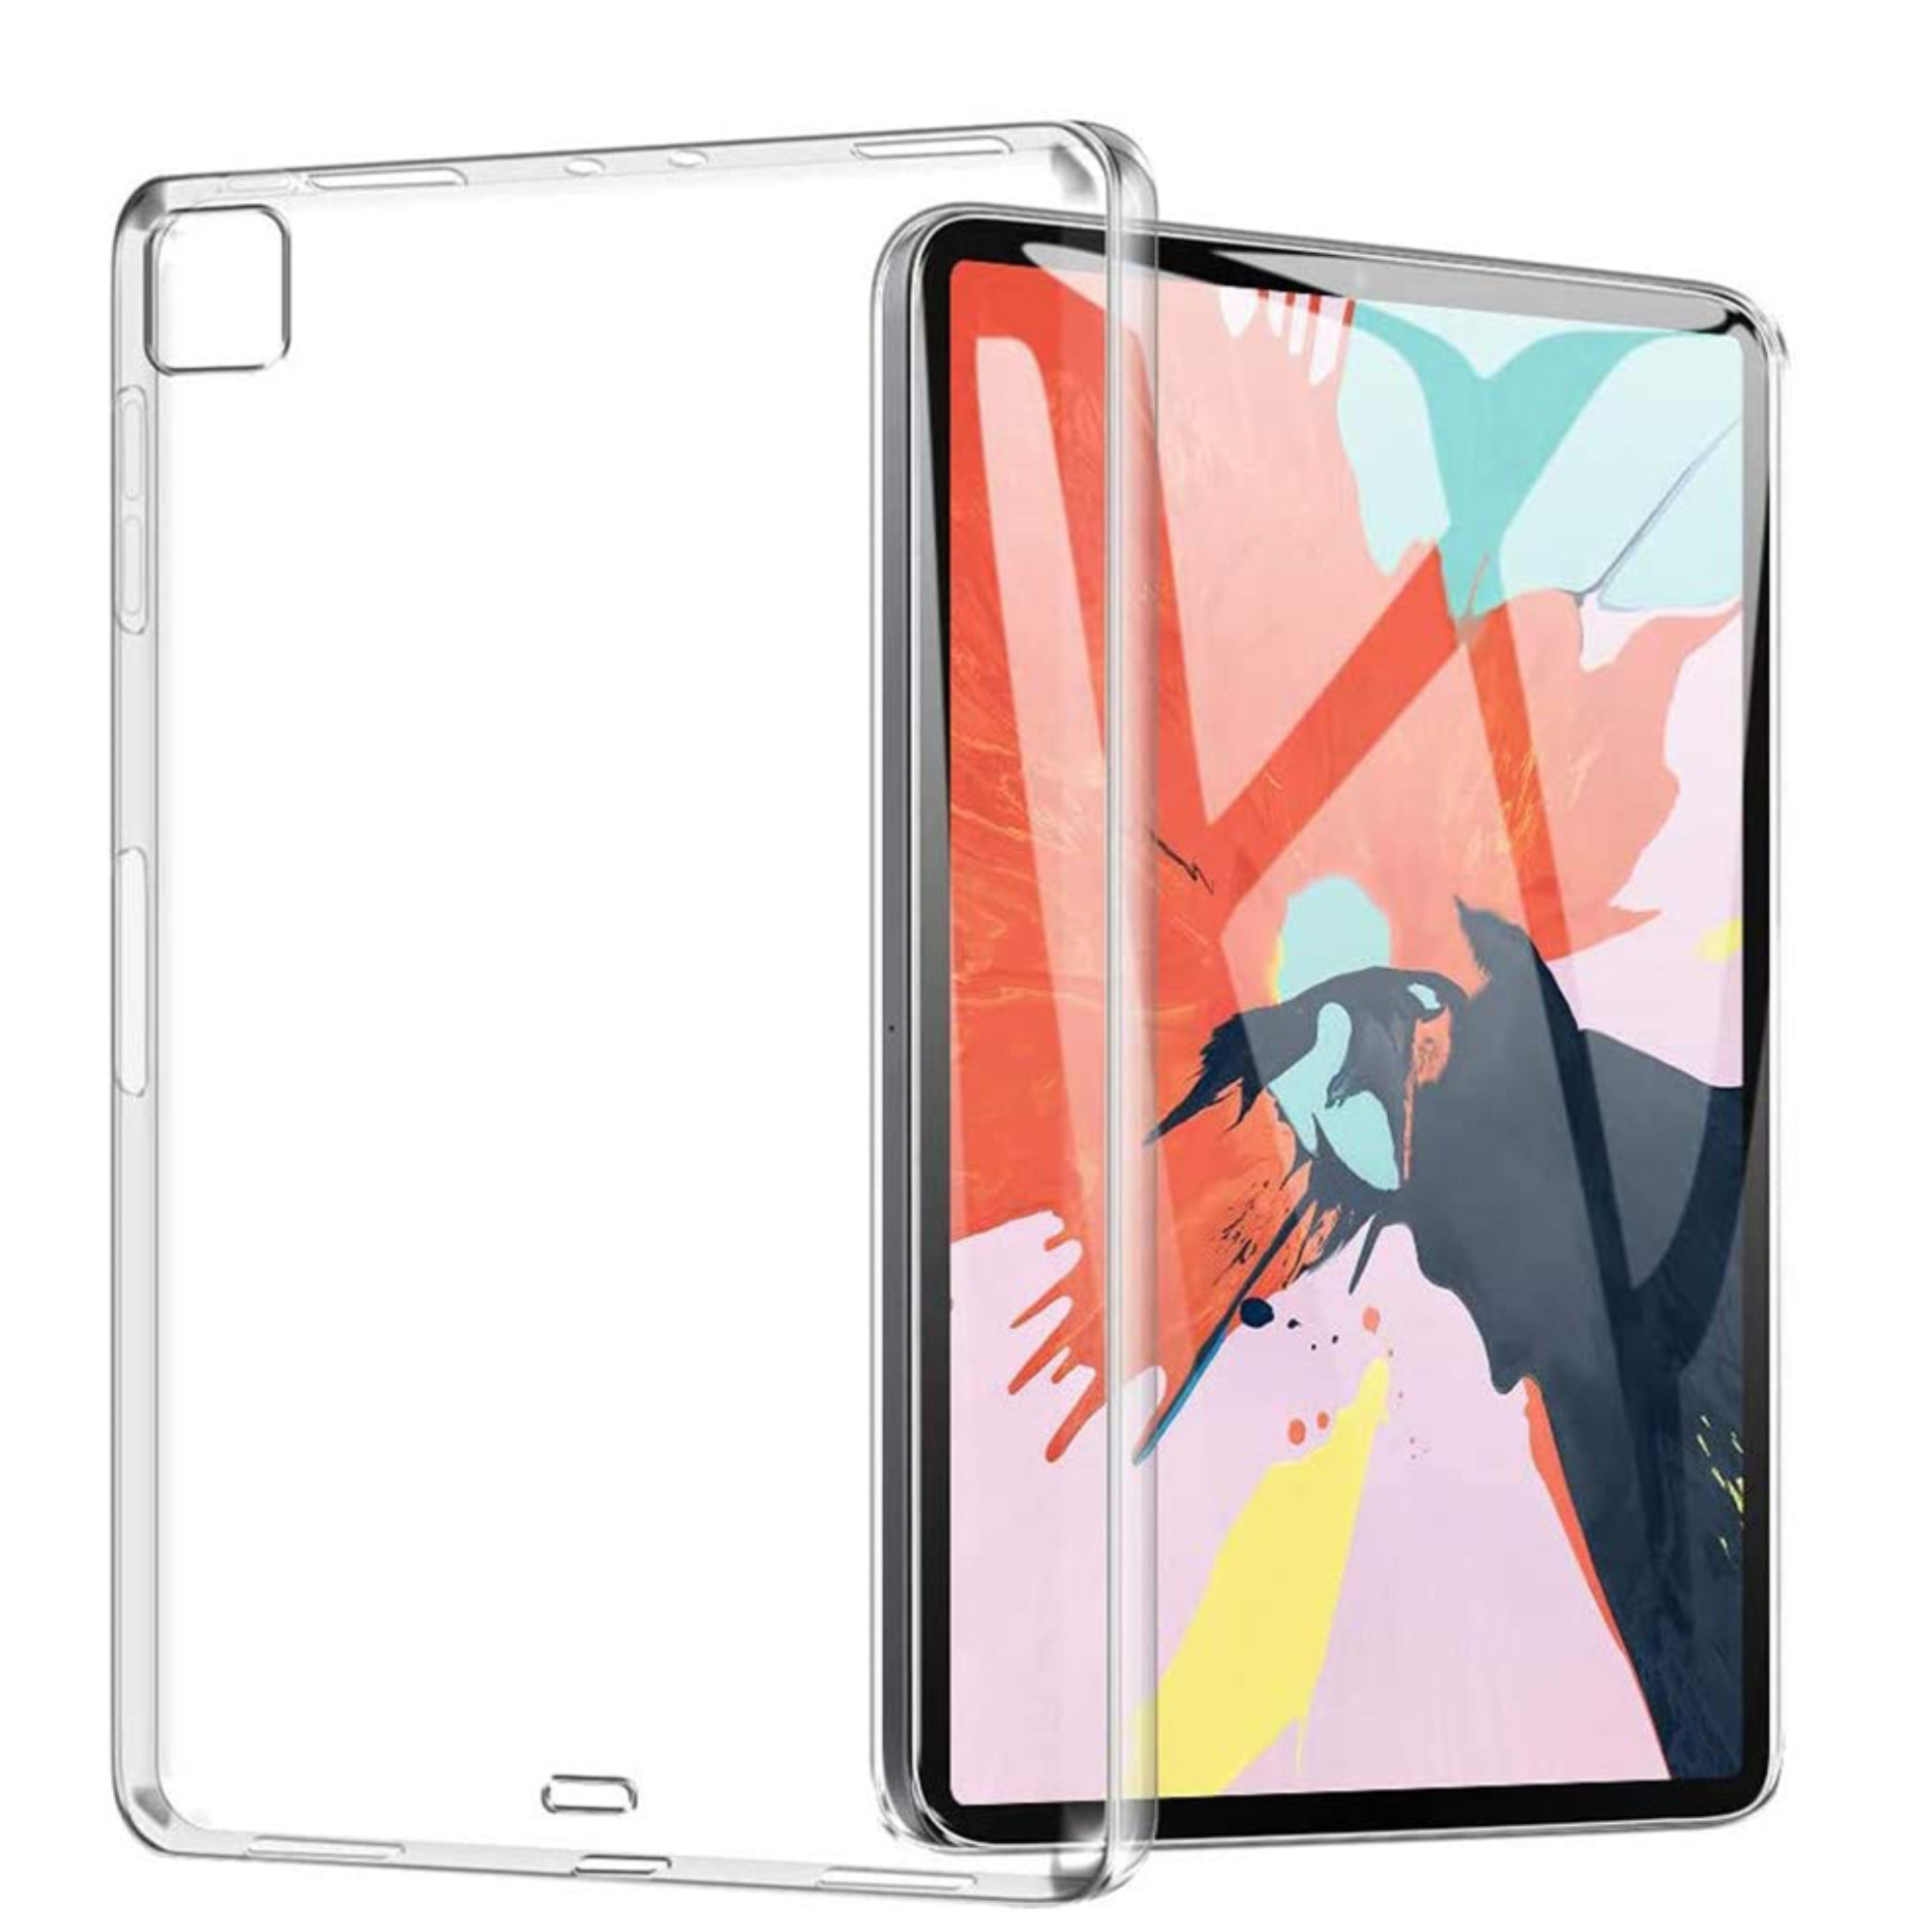 Protective Cover for iPad Pro 12.9 (2021 Version)